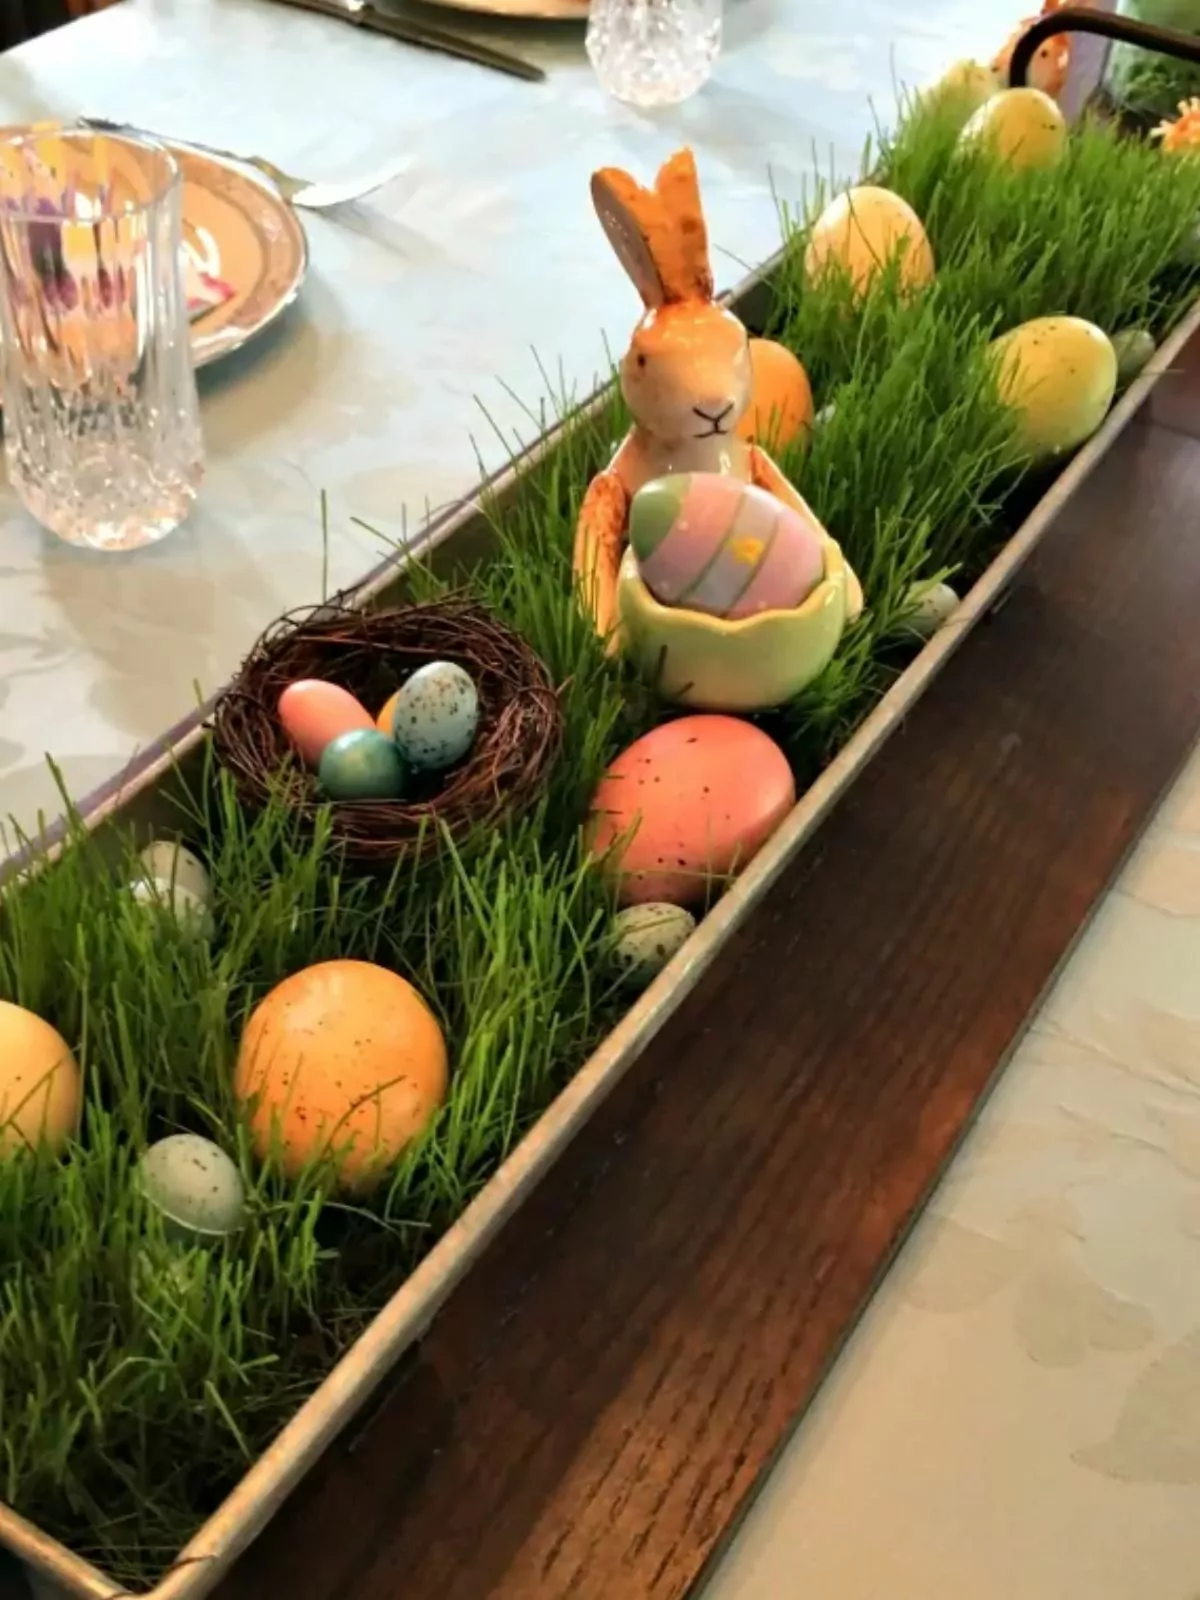 grass centerpiece decorated with fake eggs and a ceramic bunny.